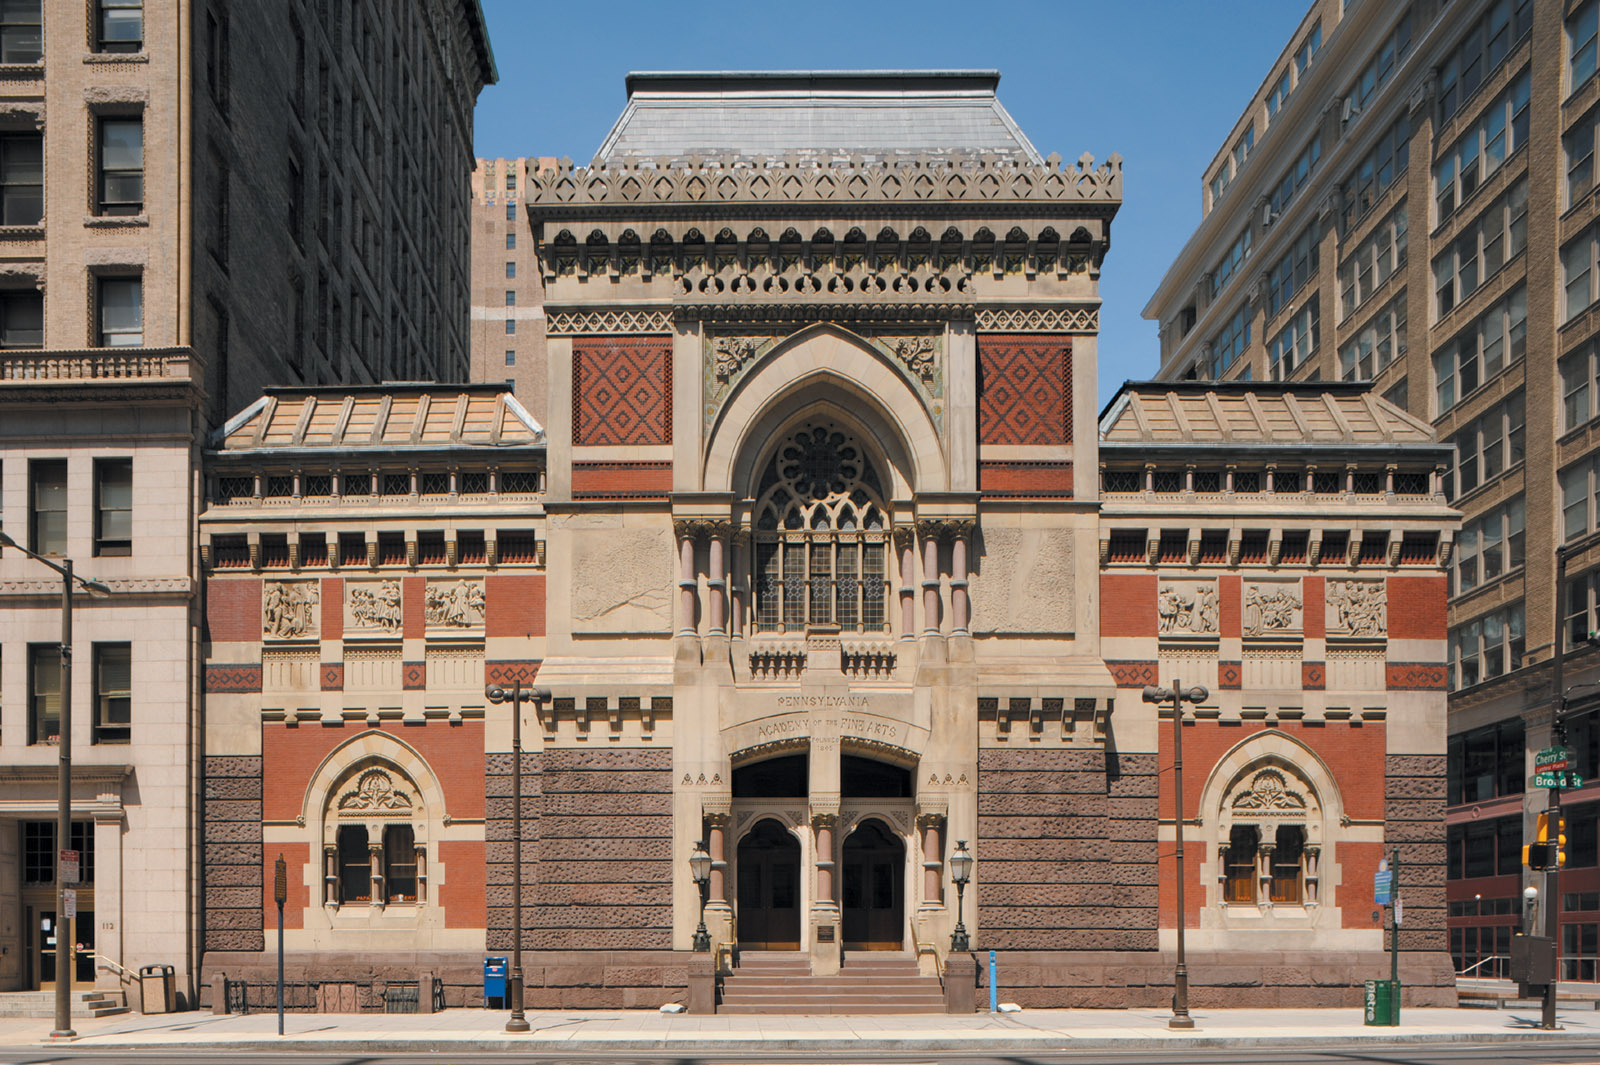 The front façade of the Pennsylvania Academy of the Fine Arts, Philadelphia; designed by Frank Furness, 1871–1876